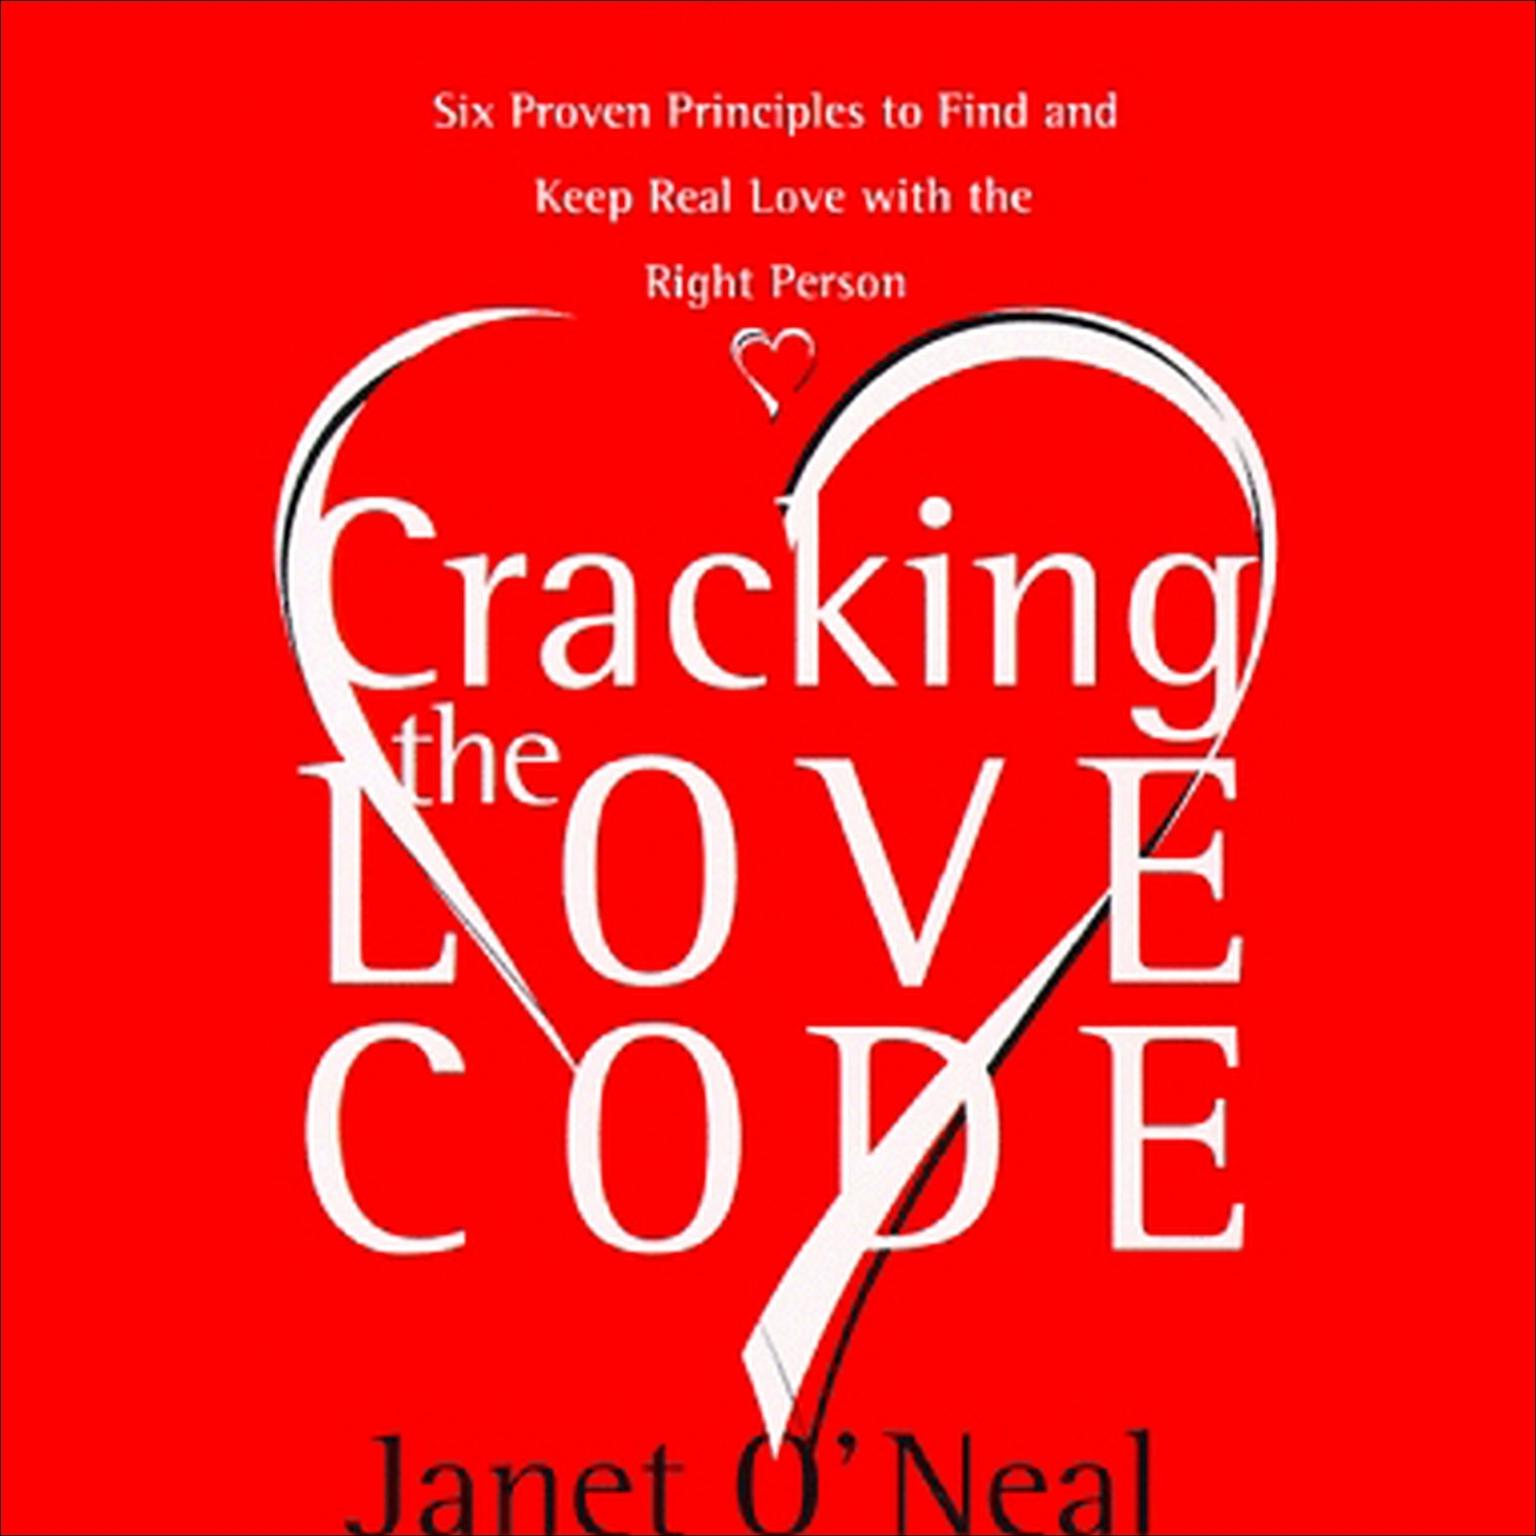 Cracking the Love Code (Abridged): Six Proven Principles to Find and Keep Real Love with the Right Person Audiobook, by Janet O'Neal